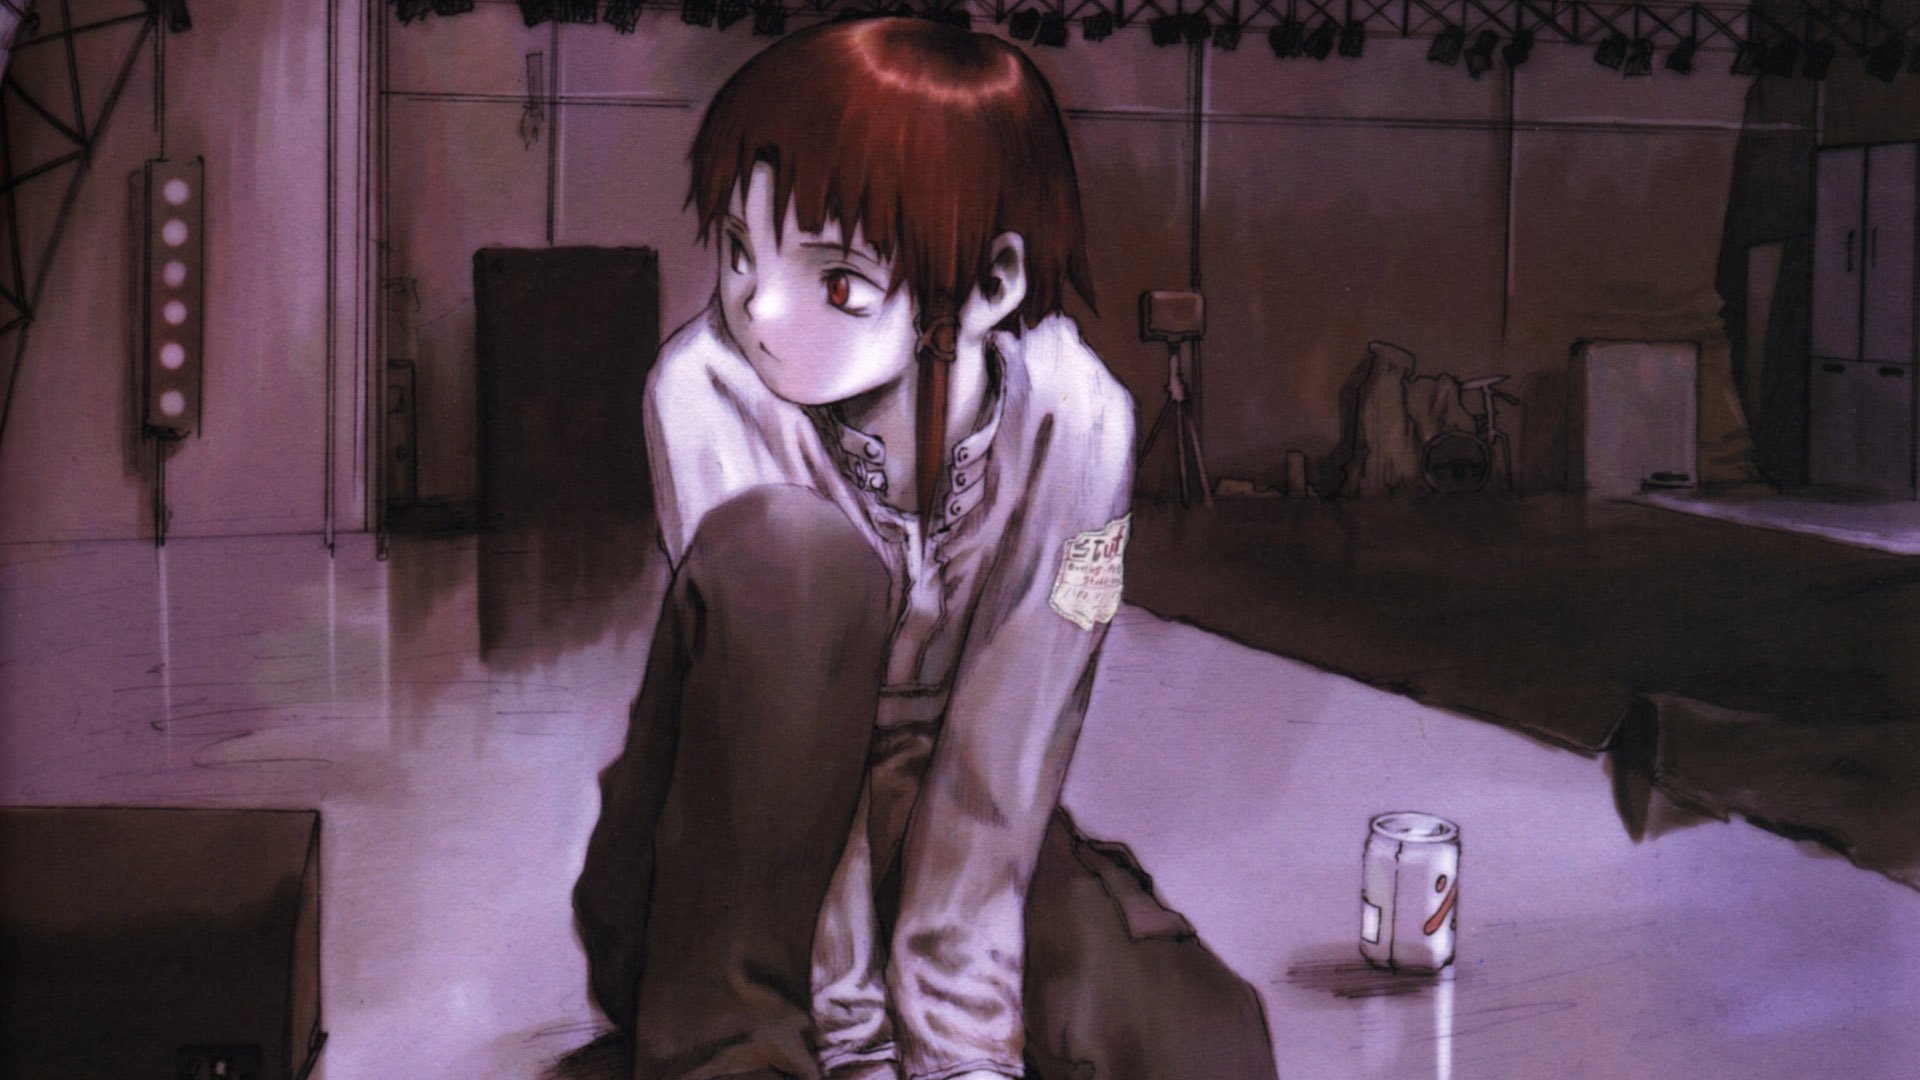 Anime Serial Experiments Lain Hd Wallpaper